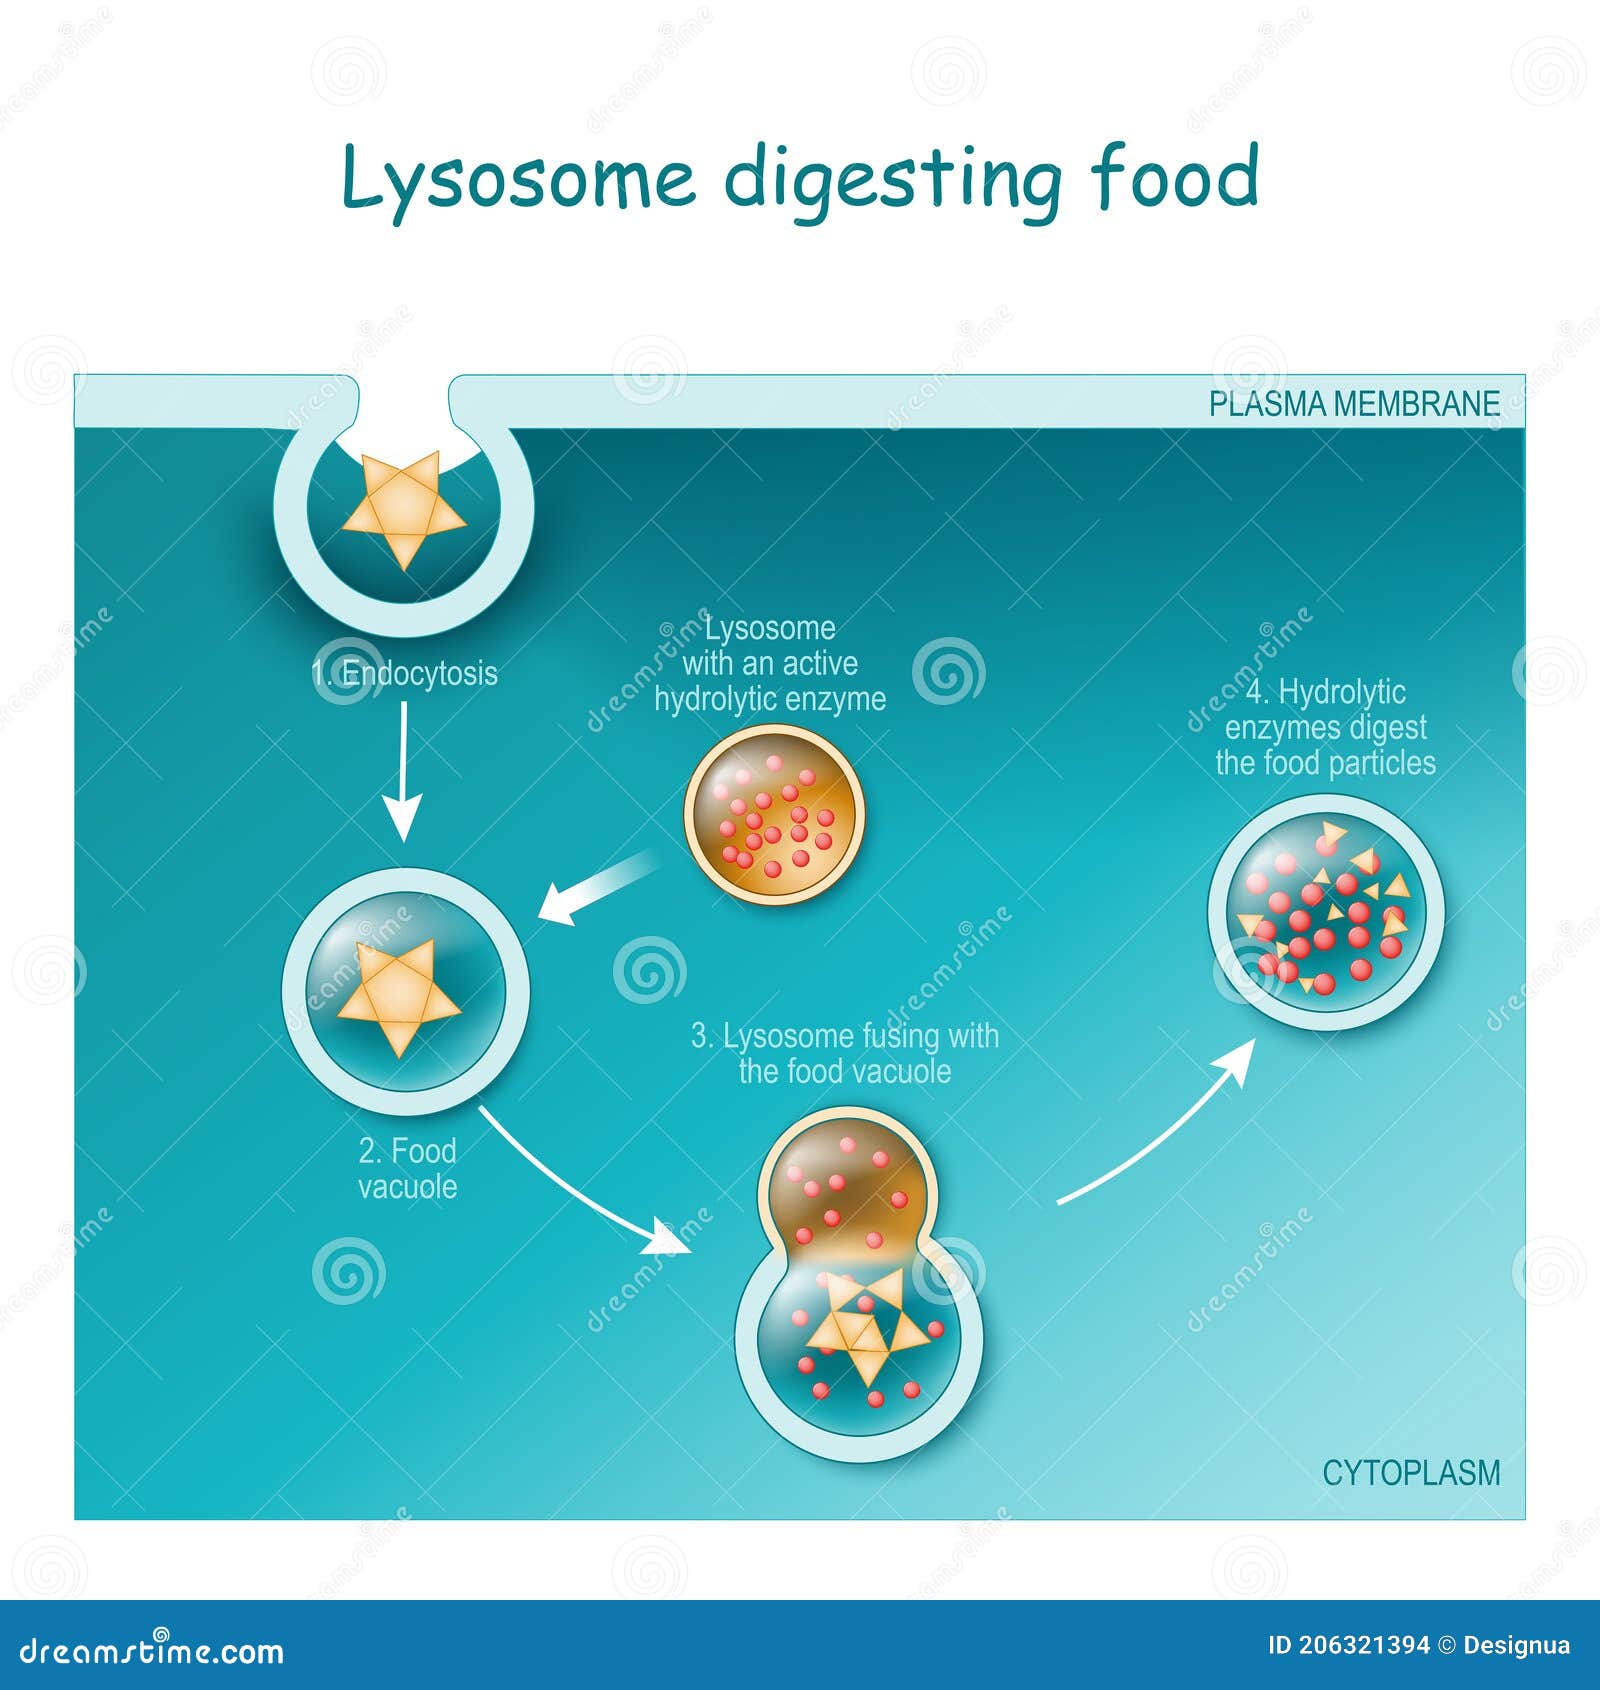 Albums 99+ Images how do food vacuoles and lysosomes help with nutrition Full HD, 2k, 4k